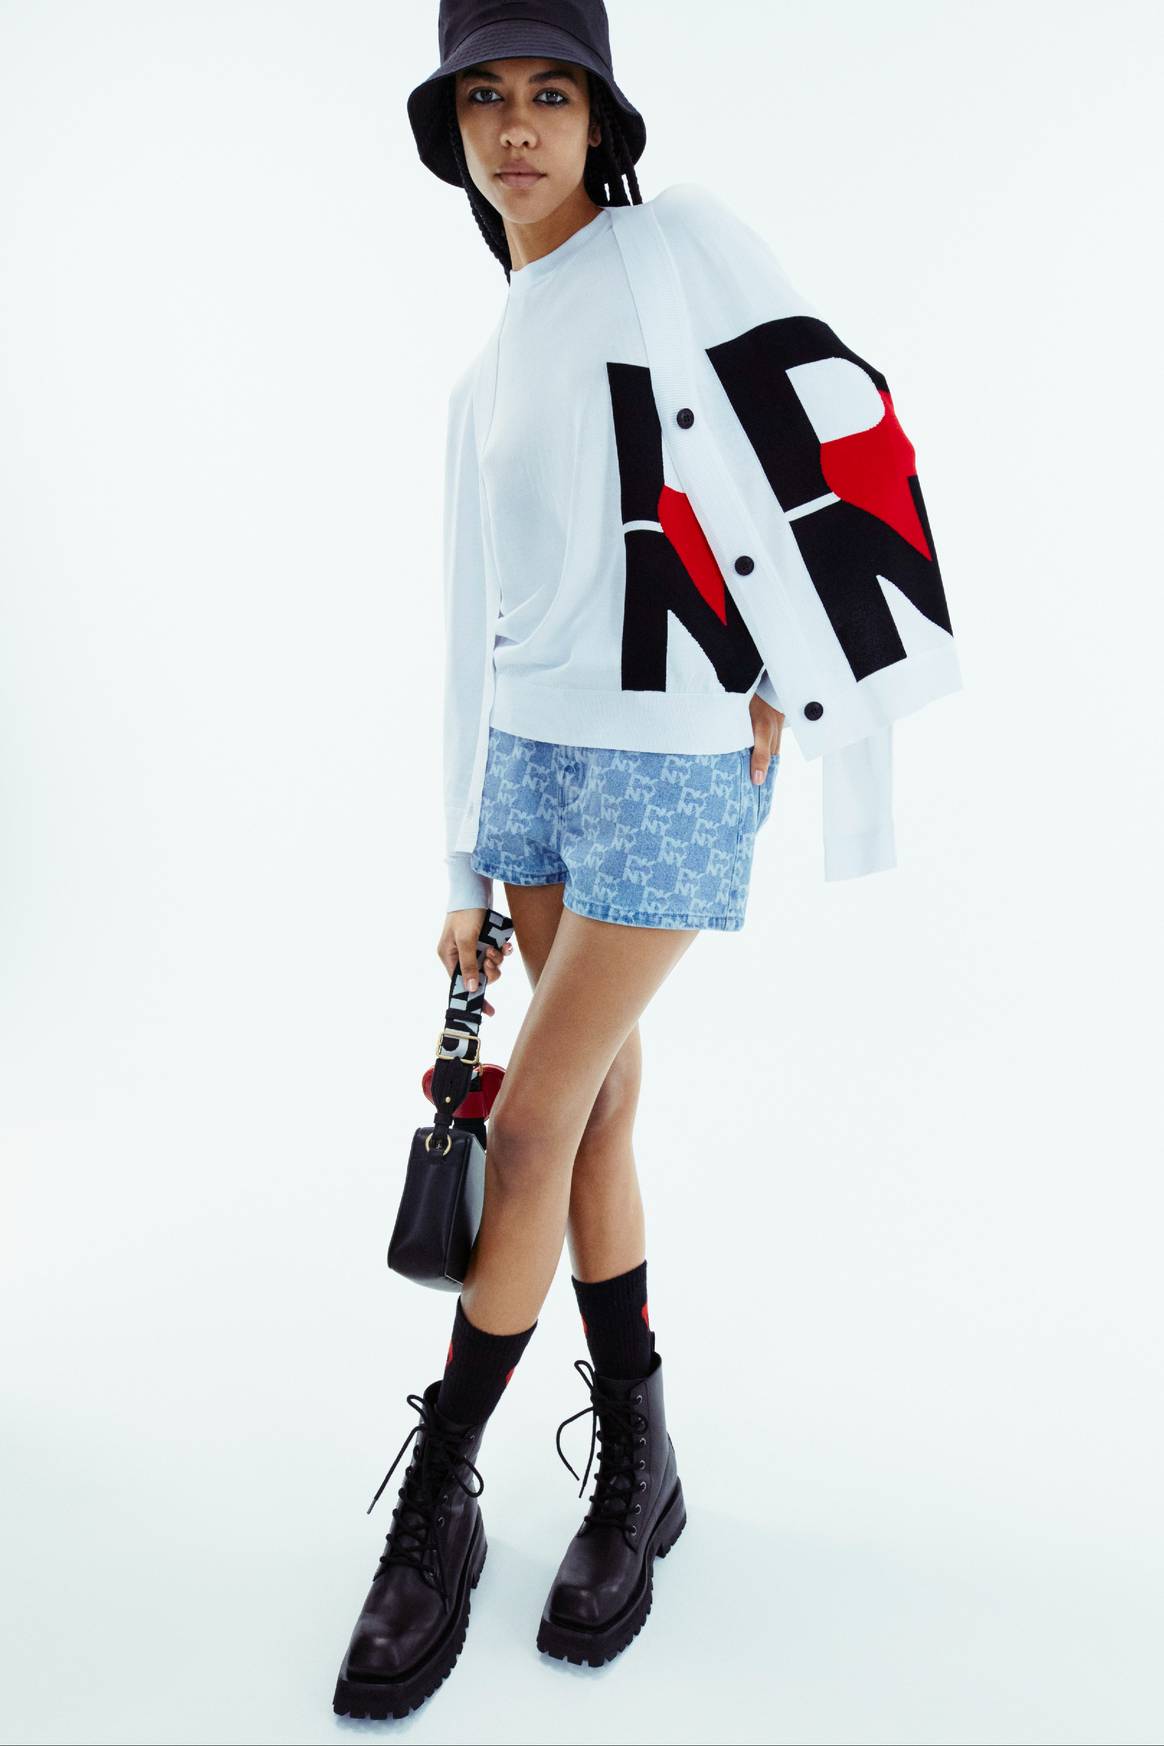 DKNY ‘The Heart of NY’ capsule collection